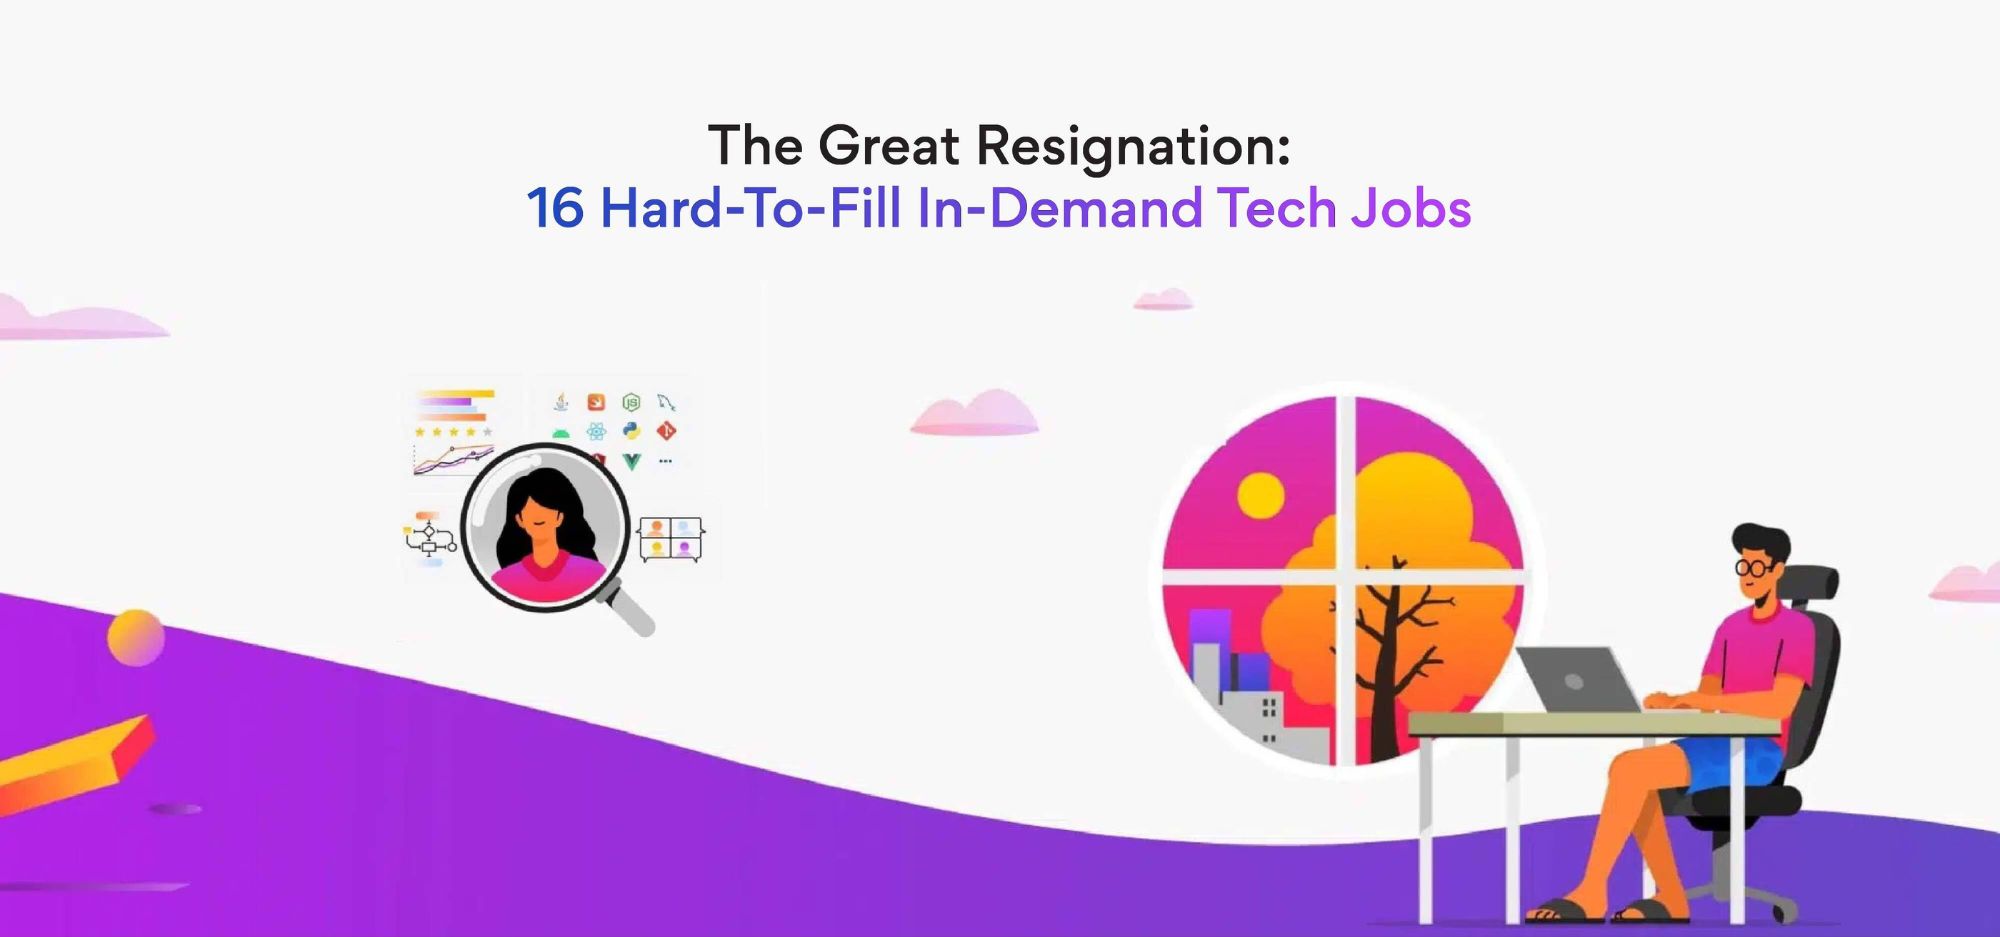 16 Most-In-Demand Tech Jobs in the Great Resignation